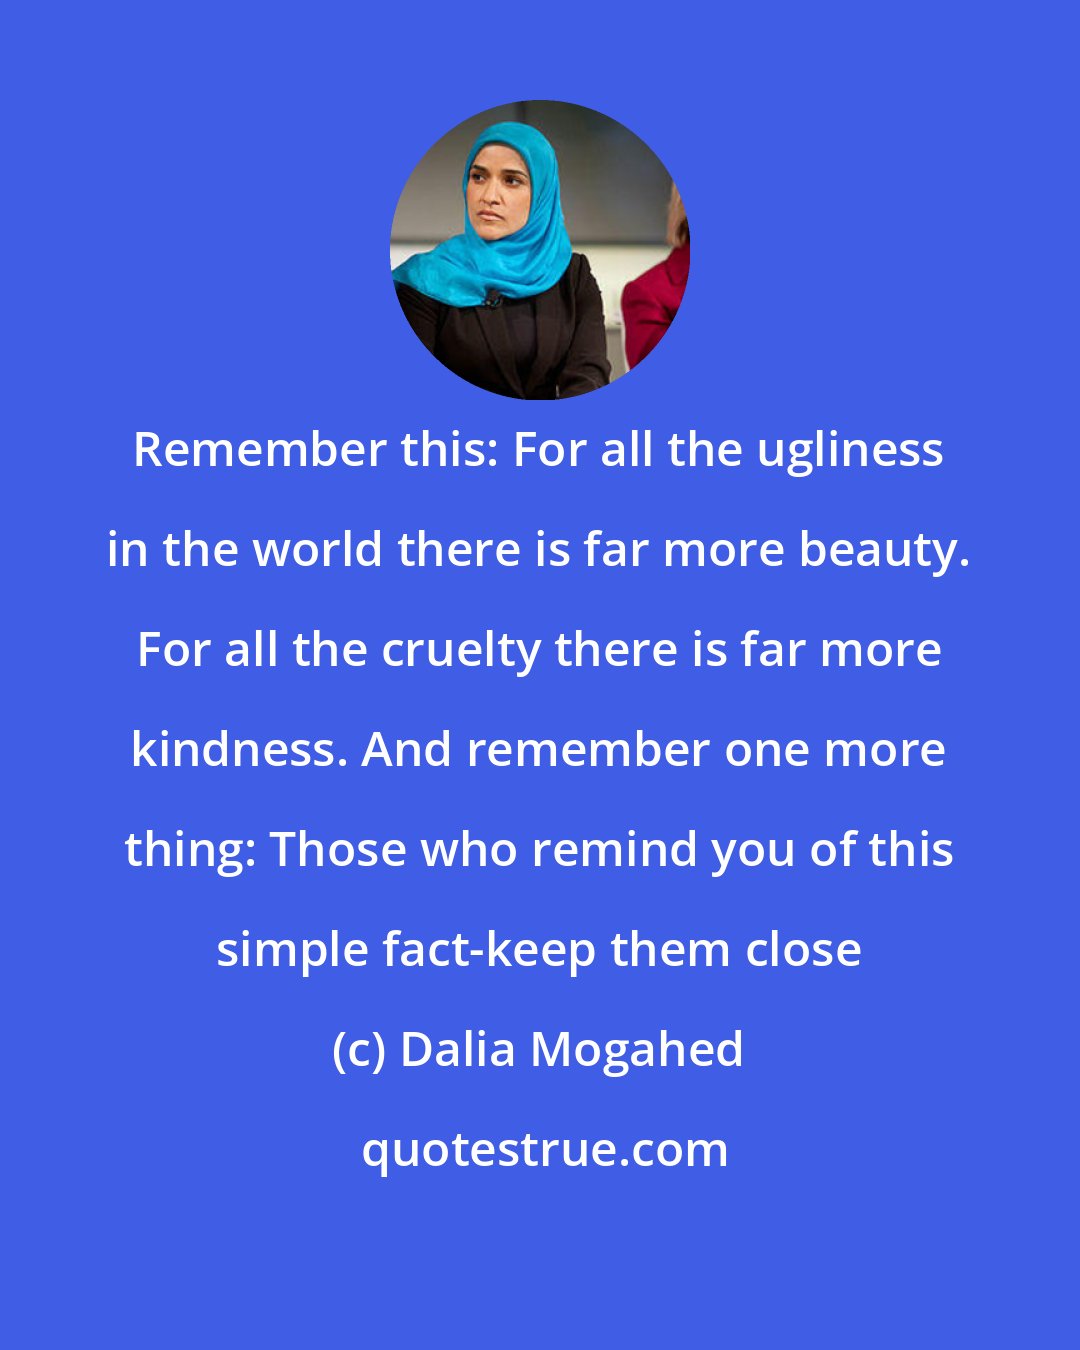 Dalia Mogahed: Remember this: For all the ugliness in the world there is far more beauty. For all the cruelty there is far more kindness. And remember one more thing: Those who remind you of this simple fact-keep them close